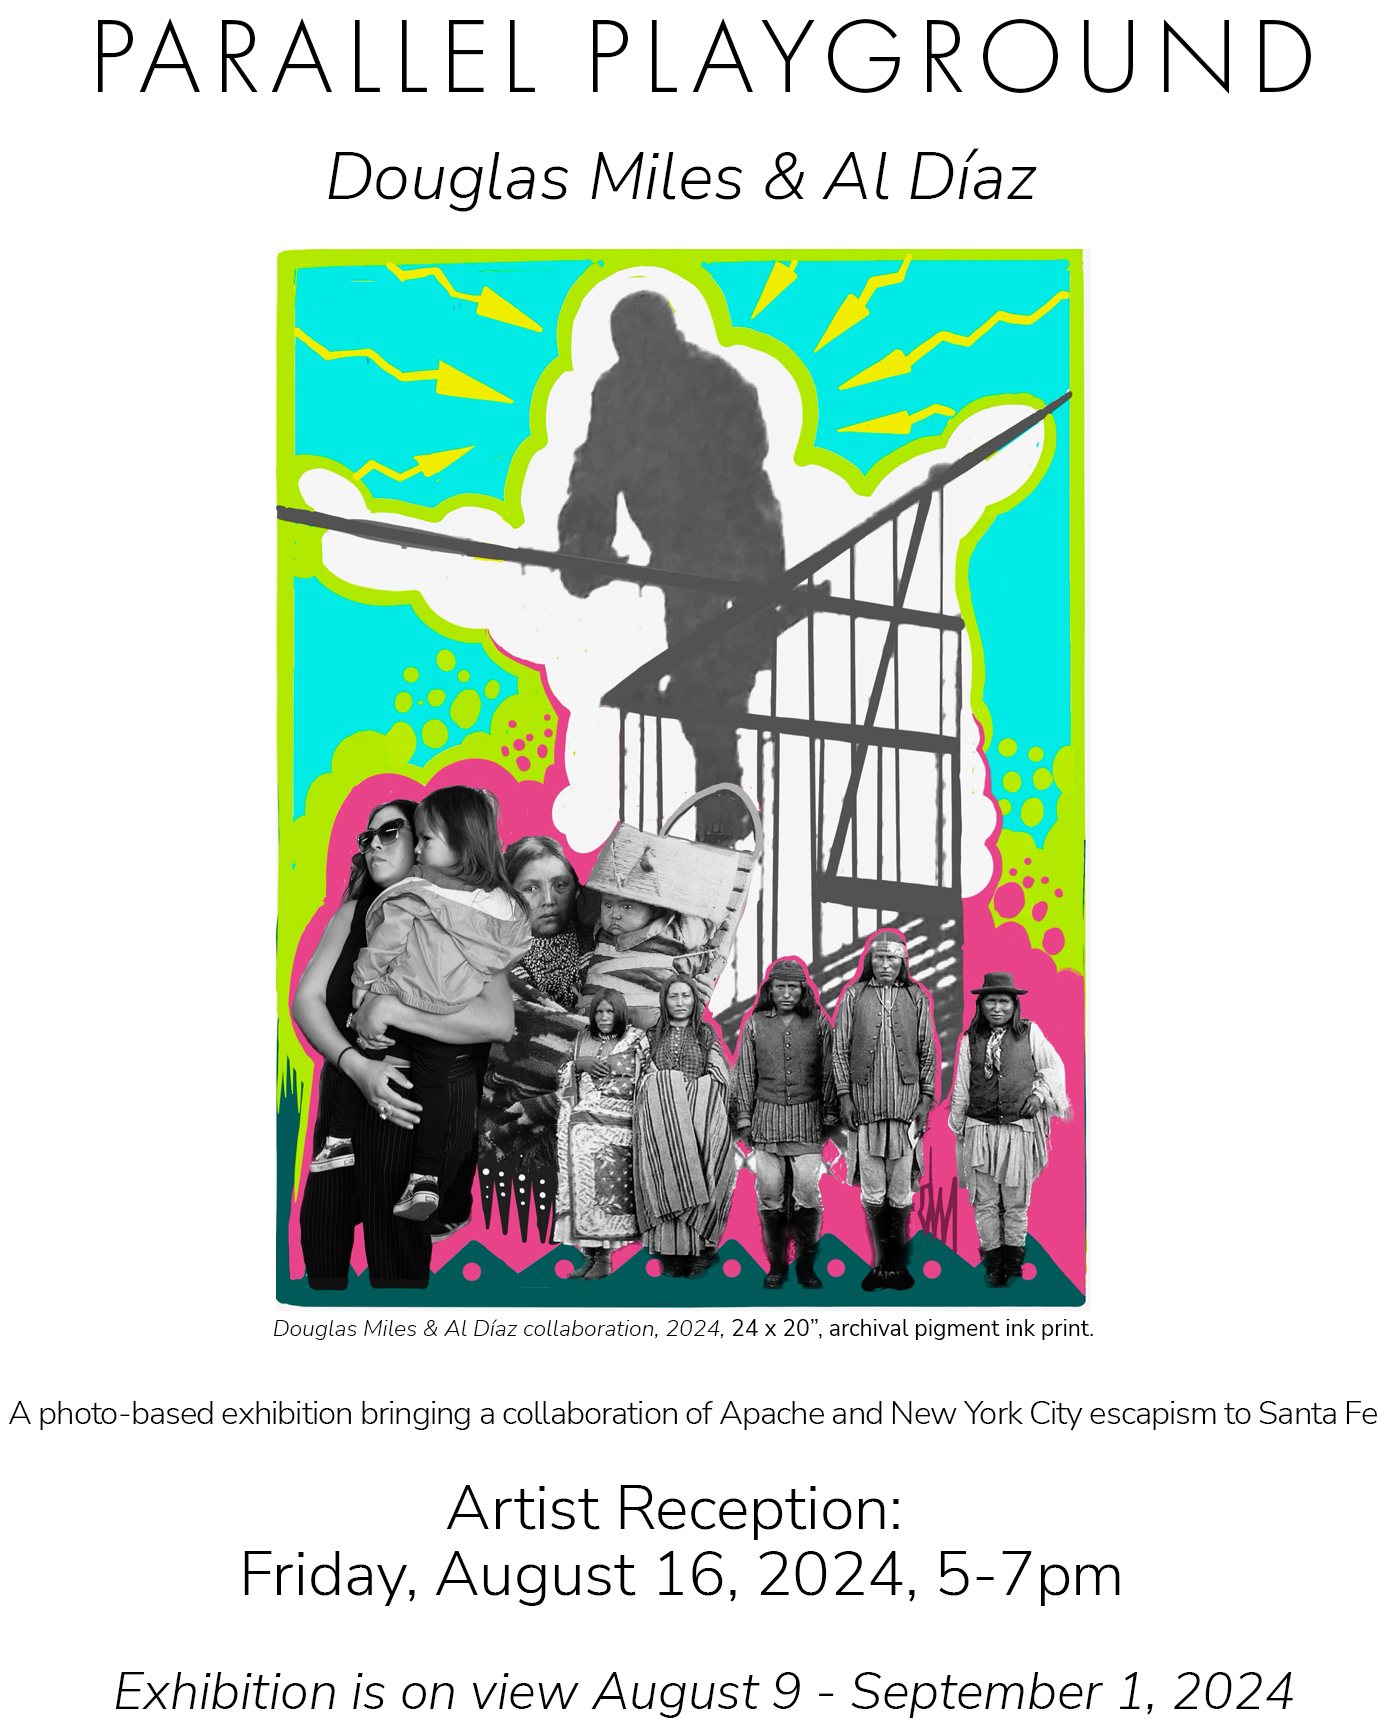 Parallel Playground with Douglas Miles & Al Diaz, Artist Reception, Friday August 16, 2024, 5-7pm